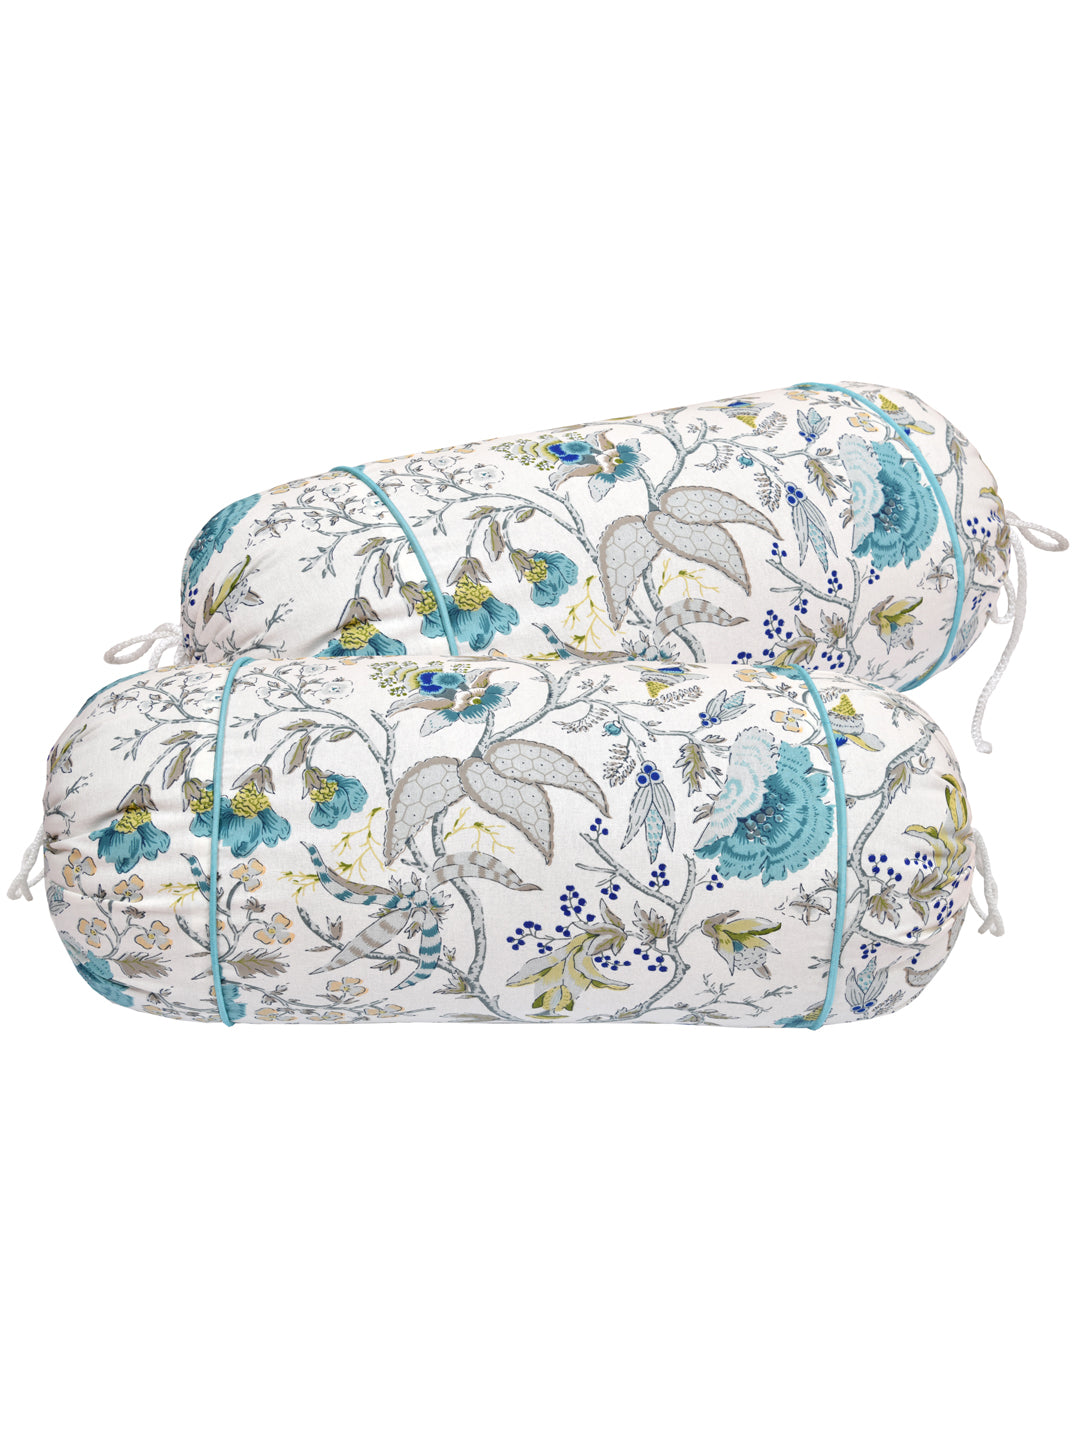 Bolster Cover Set Of 2 Turquoise Blue & Green Flowers